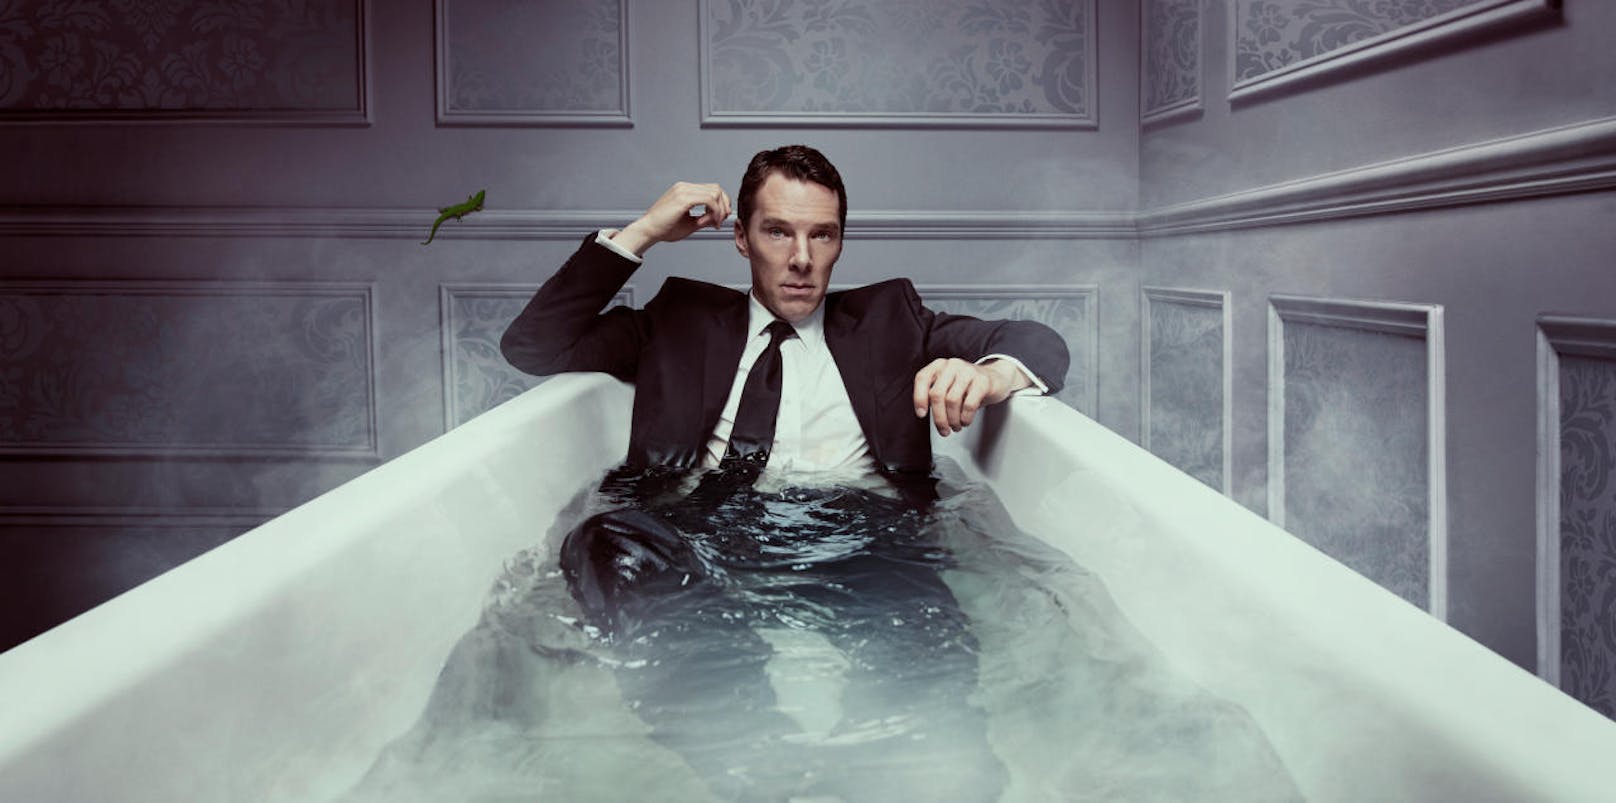 Based on the acclaimed Patrick Melrose series of novels written by Edward St. Aubyn and adapted by BAFTA award nominee David Nicholls (Far From the Madding Crowd, One Day), Melrose gleefully skewers the British upper class as it tracks the titular characters harrowing odyssey from a deeply traumatic childhood, through adult substance abuse and ultimately, towards recovery and redemption. Benedict Cumberbatch (The Imitation Game, Sherlock) plays Patrick Melrose, an aristocratic and outrageously funny playboy, who struggles to overcome the damage inflicted by an abusive father and a mother who tacitly condoned the behaviour. A true television saga, Melrose is both gripping and humorous, with a dramatic sweep that encompasses the South of France in the 1960s, debauched 1980s New York and sober Britain in the early 2000s. Melrose will devote an hour to each of the five novels, with each episode storytelling a few complicated and intense days in Patrick's life. Starring: Benedict Cumberbatch, Holliday Grainger, Jessica Raine.